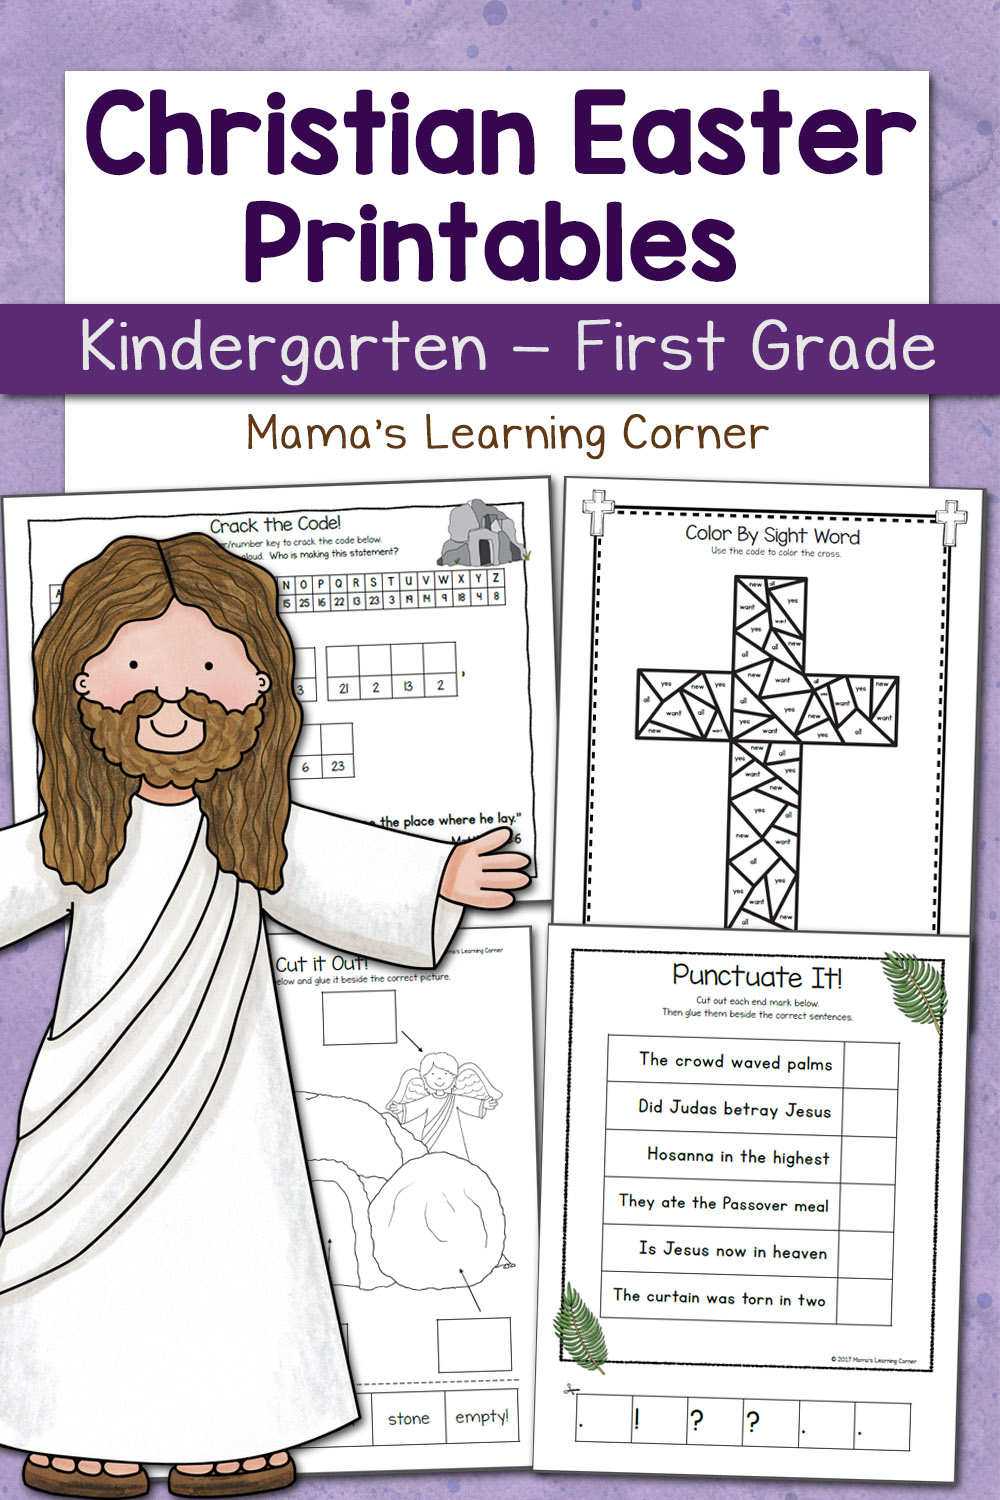 Huge List Of Easter Printables For Preschool To 2Nd Grade! - Mamas - Free Printable Easter Worksheets For 3Rd Grade